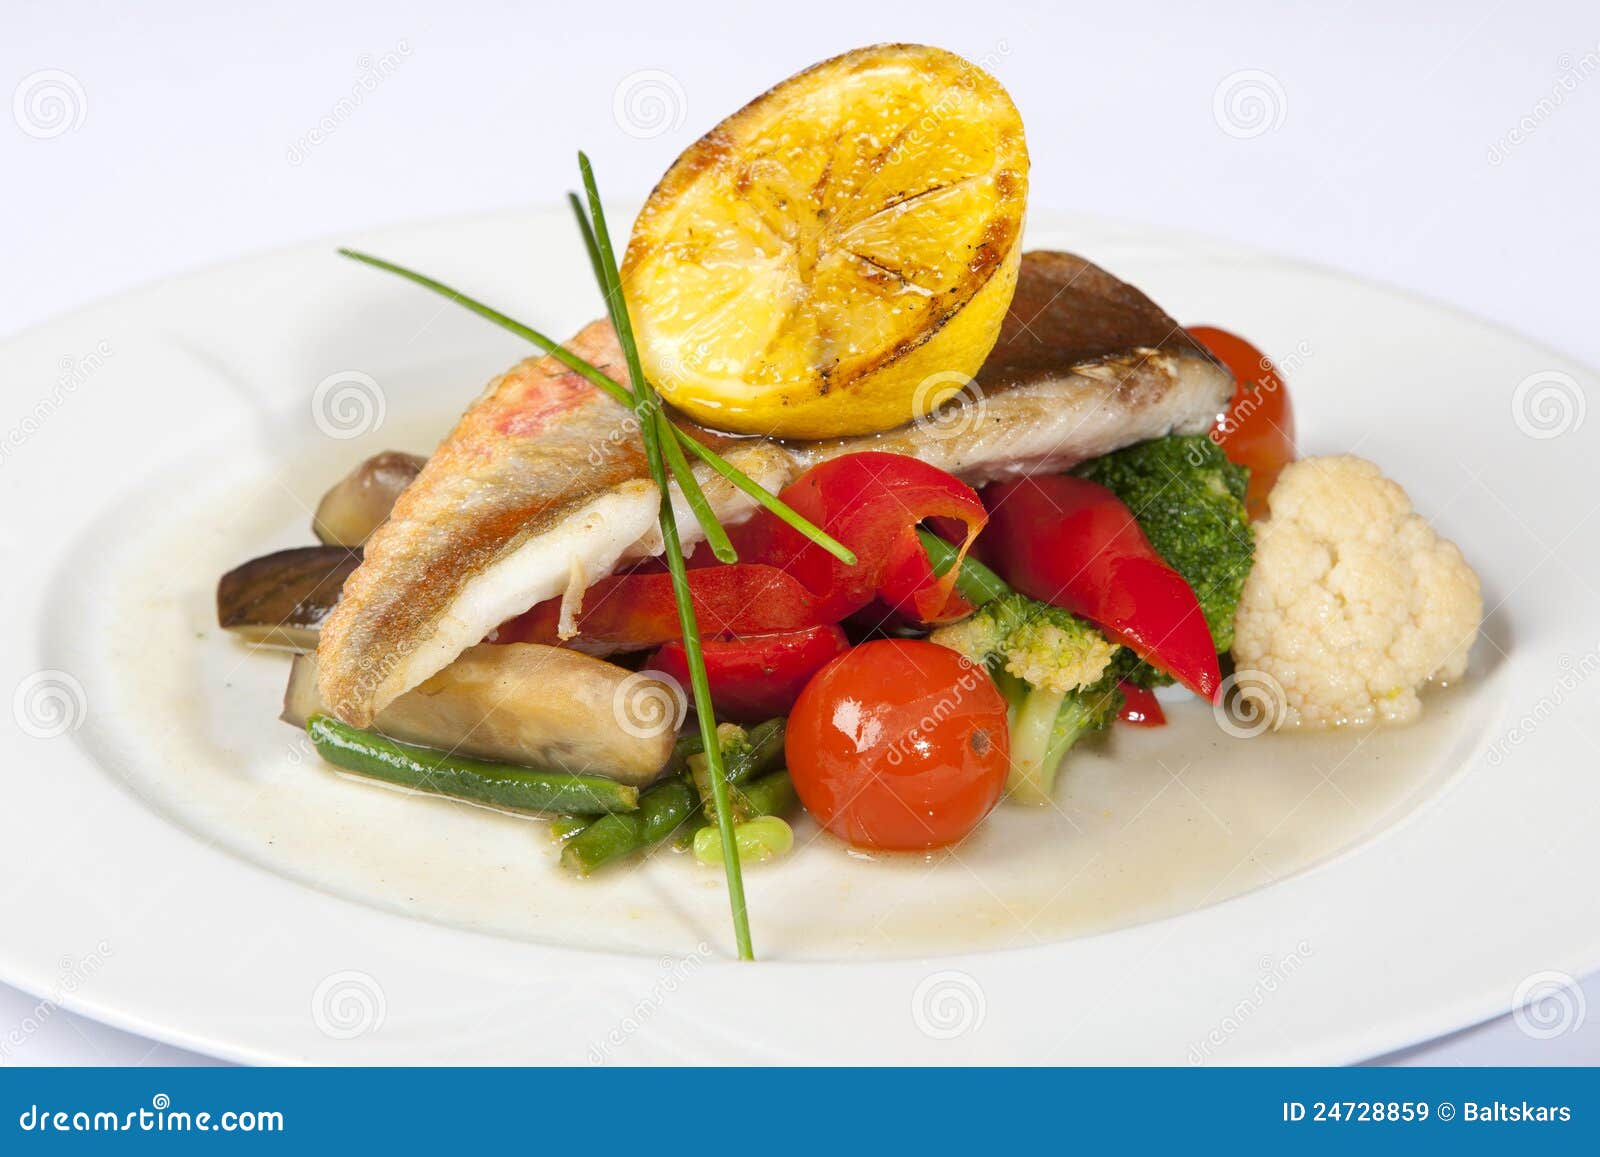 Fish dish stock image. Image of dish, sweet, dinner, vegetables - 24728859